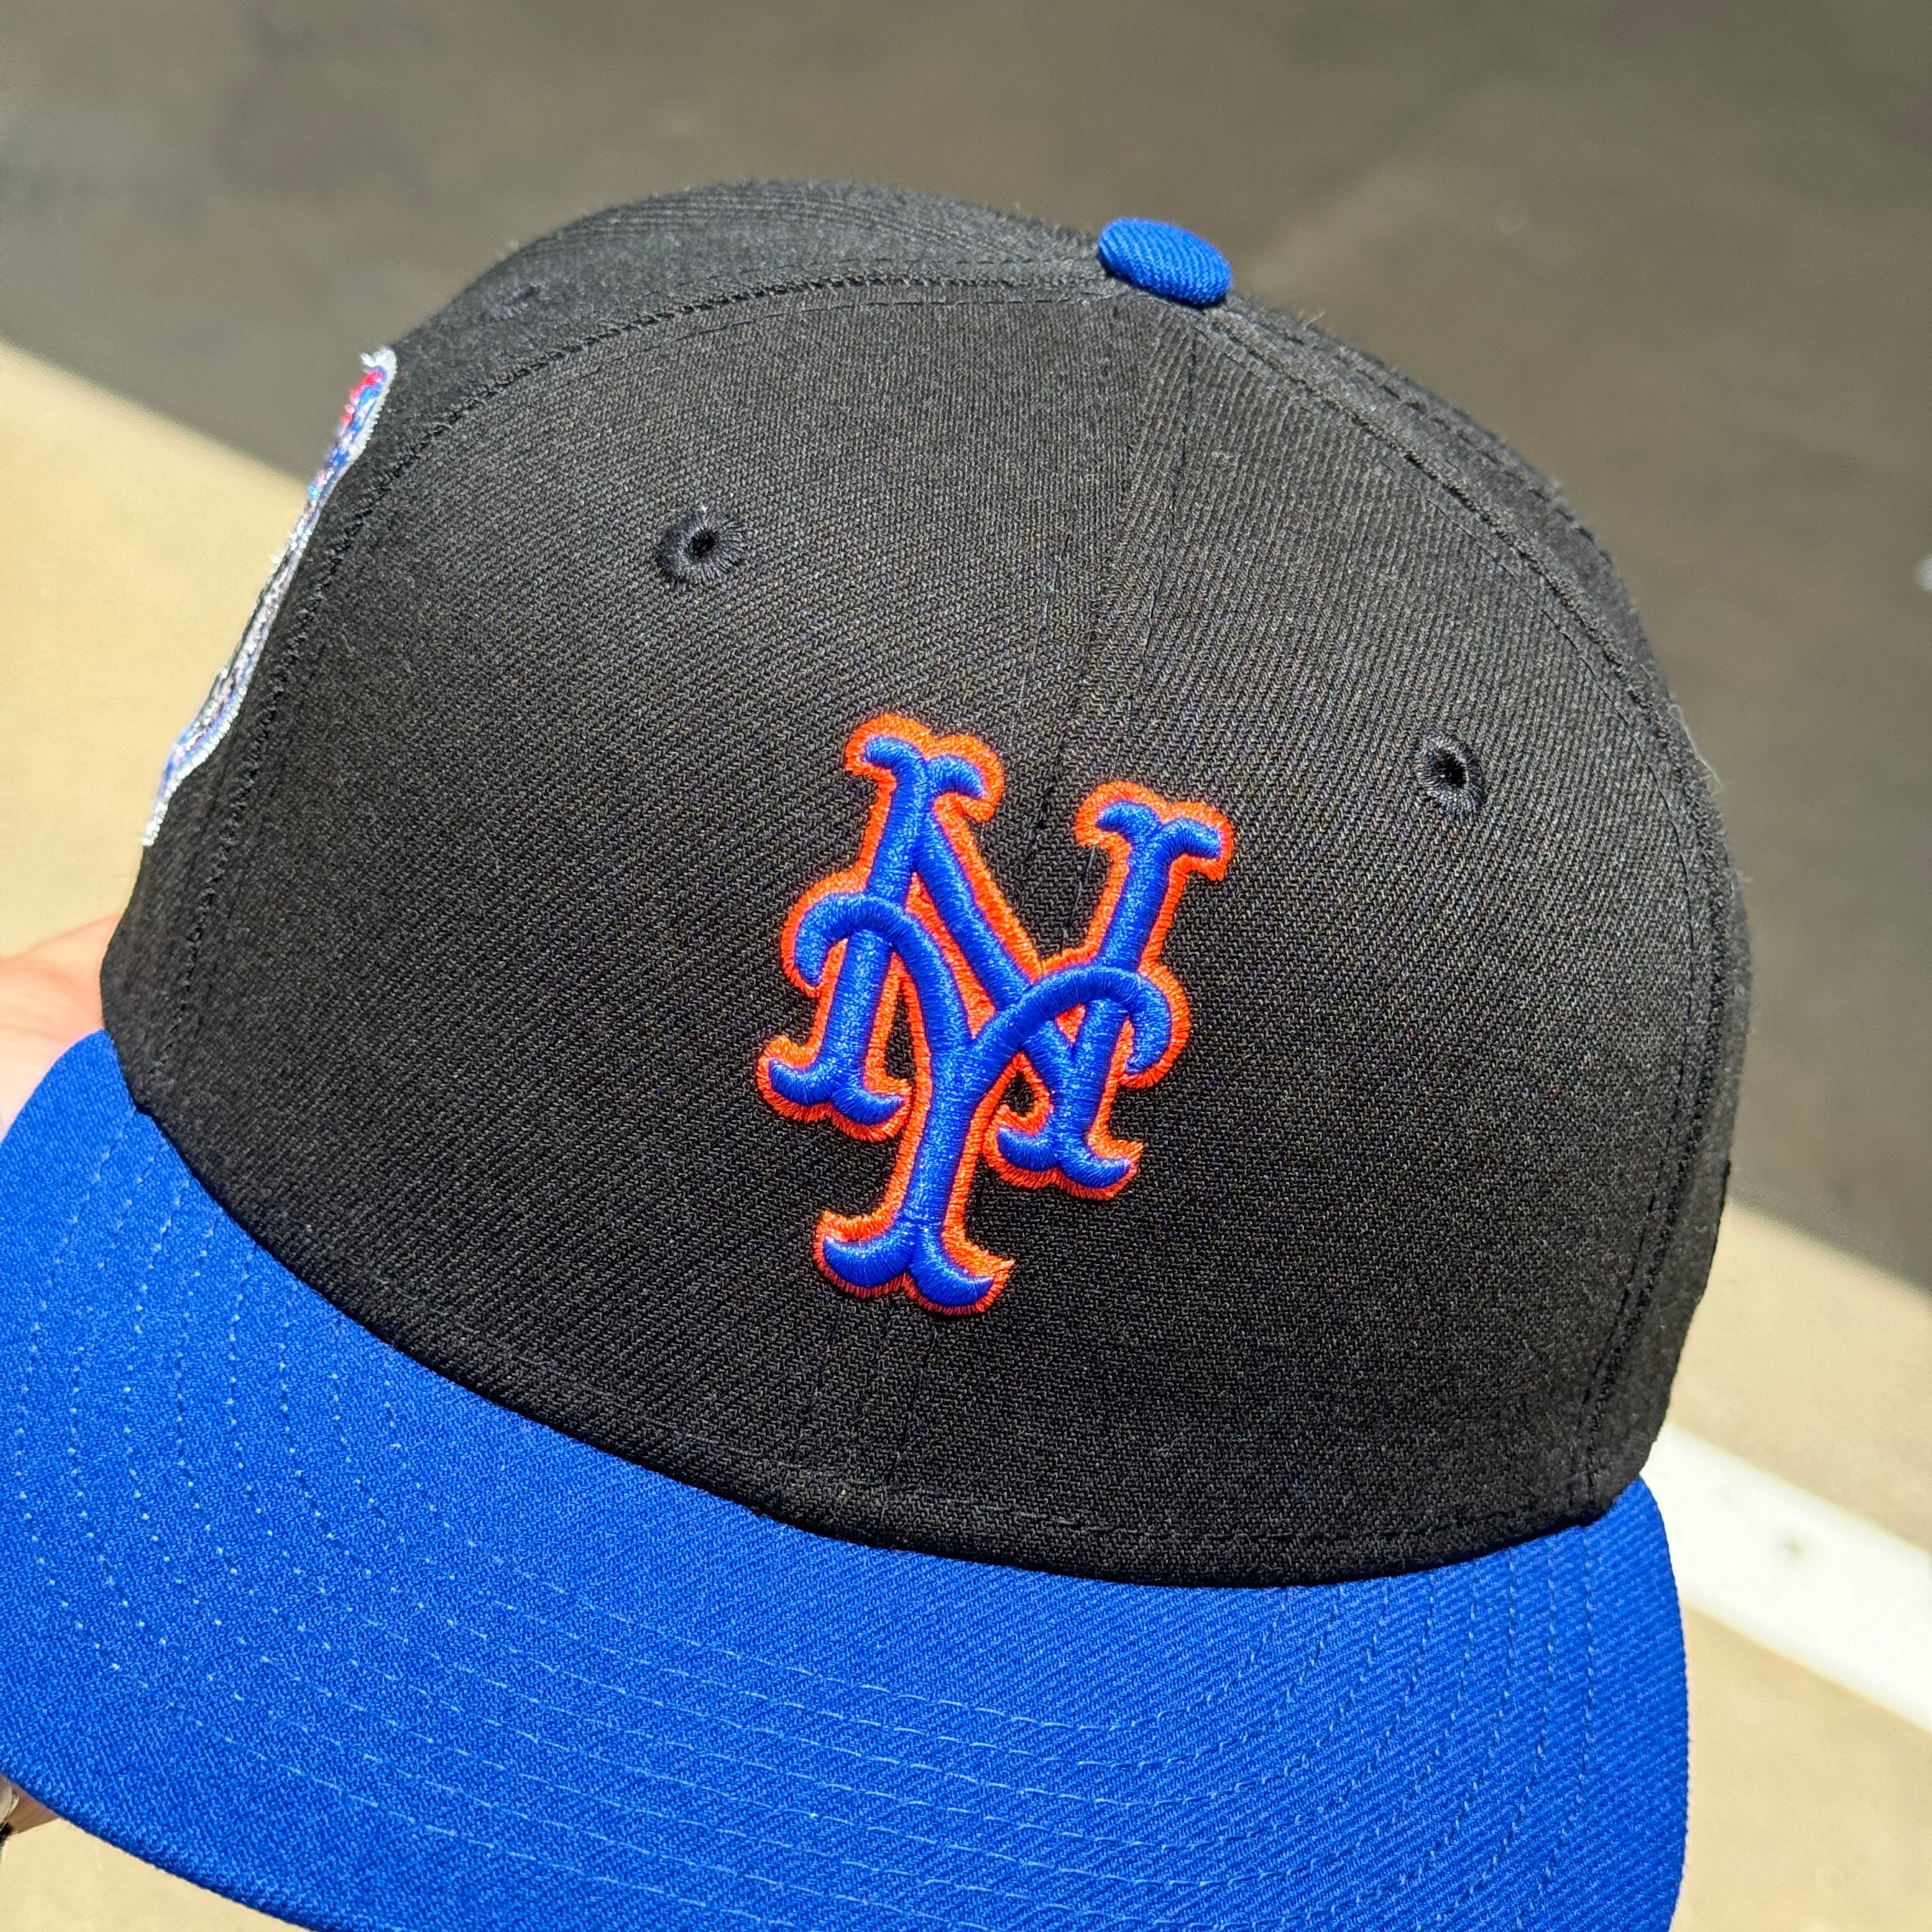 USED 1/8 Black New York Mets Subway Series 59fifty New Era Fitted Hat Cap